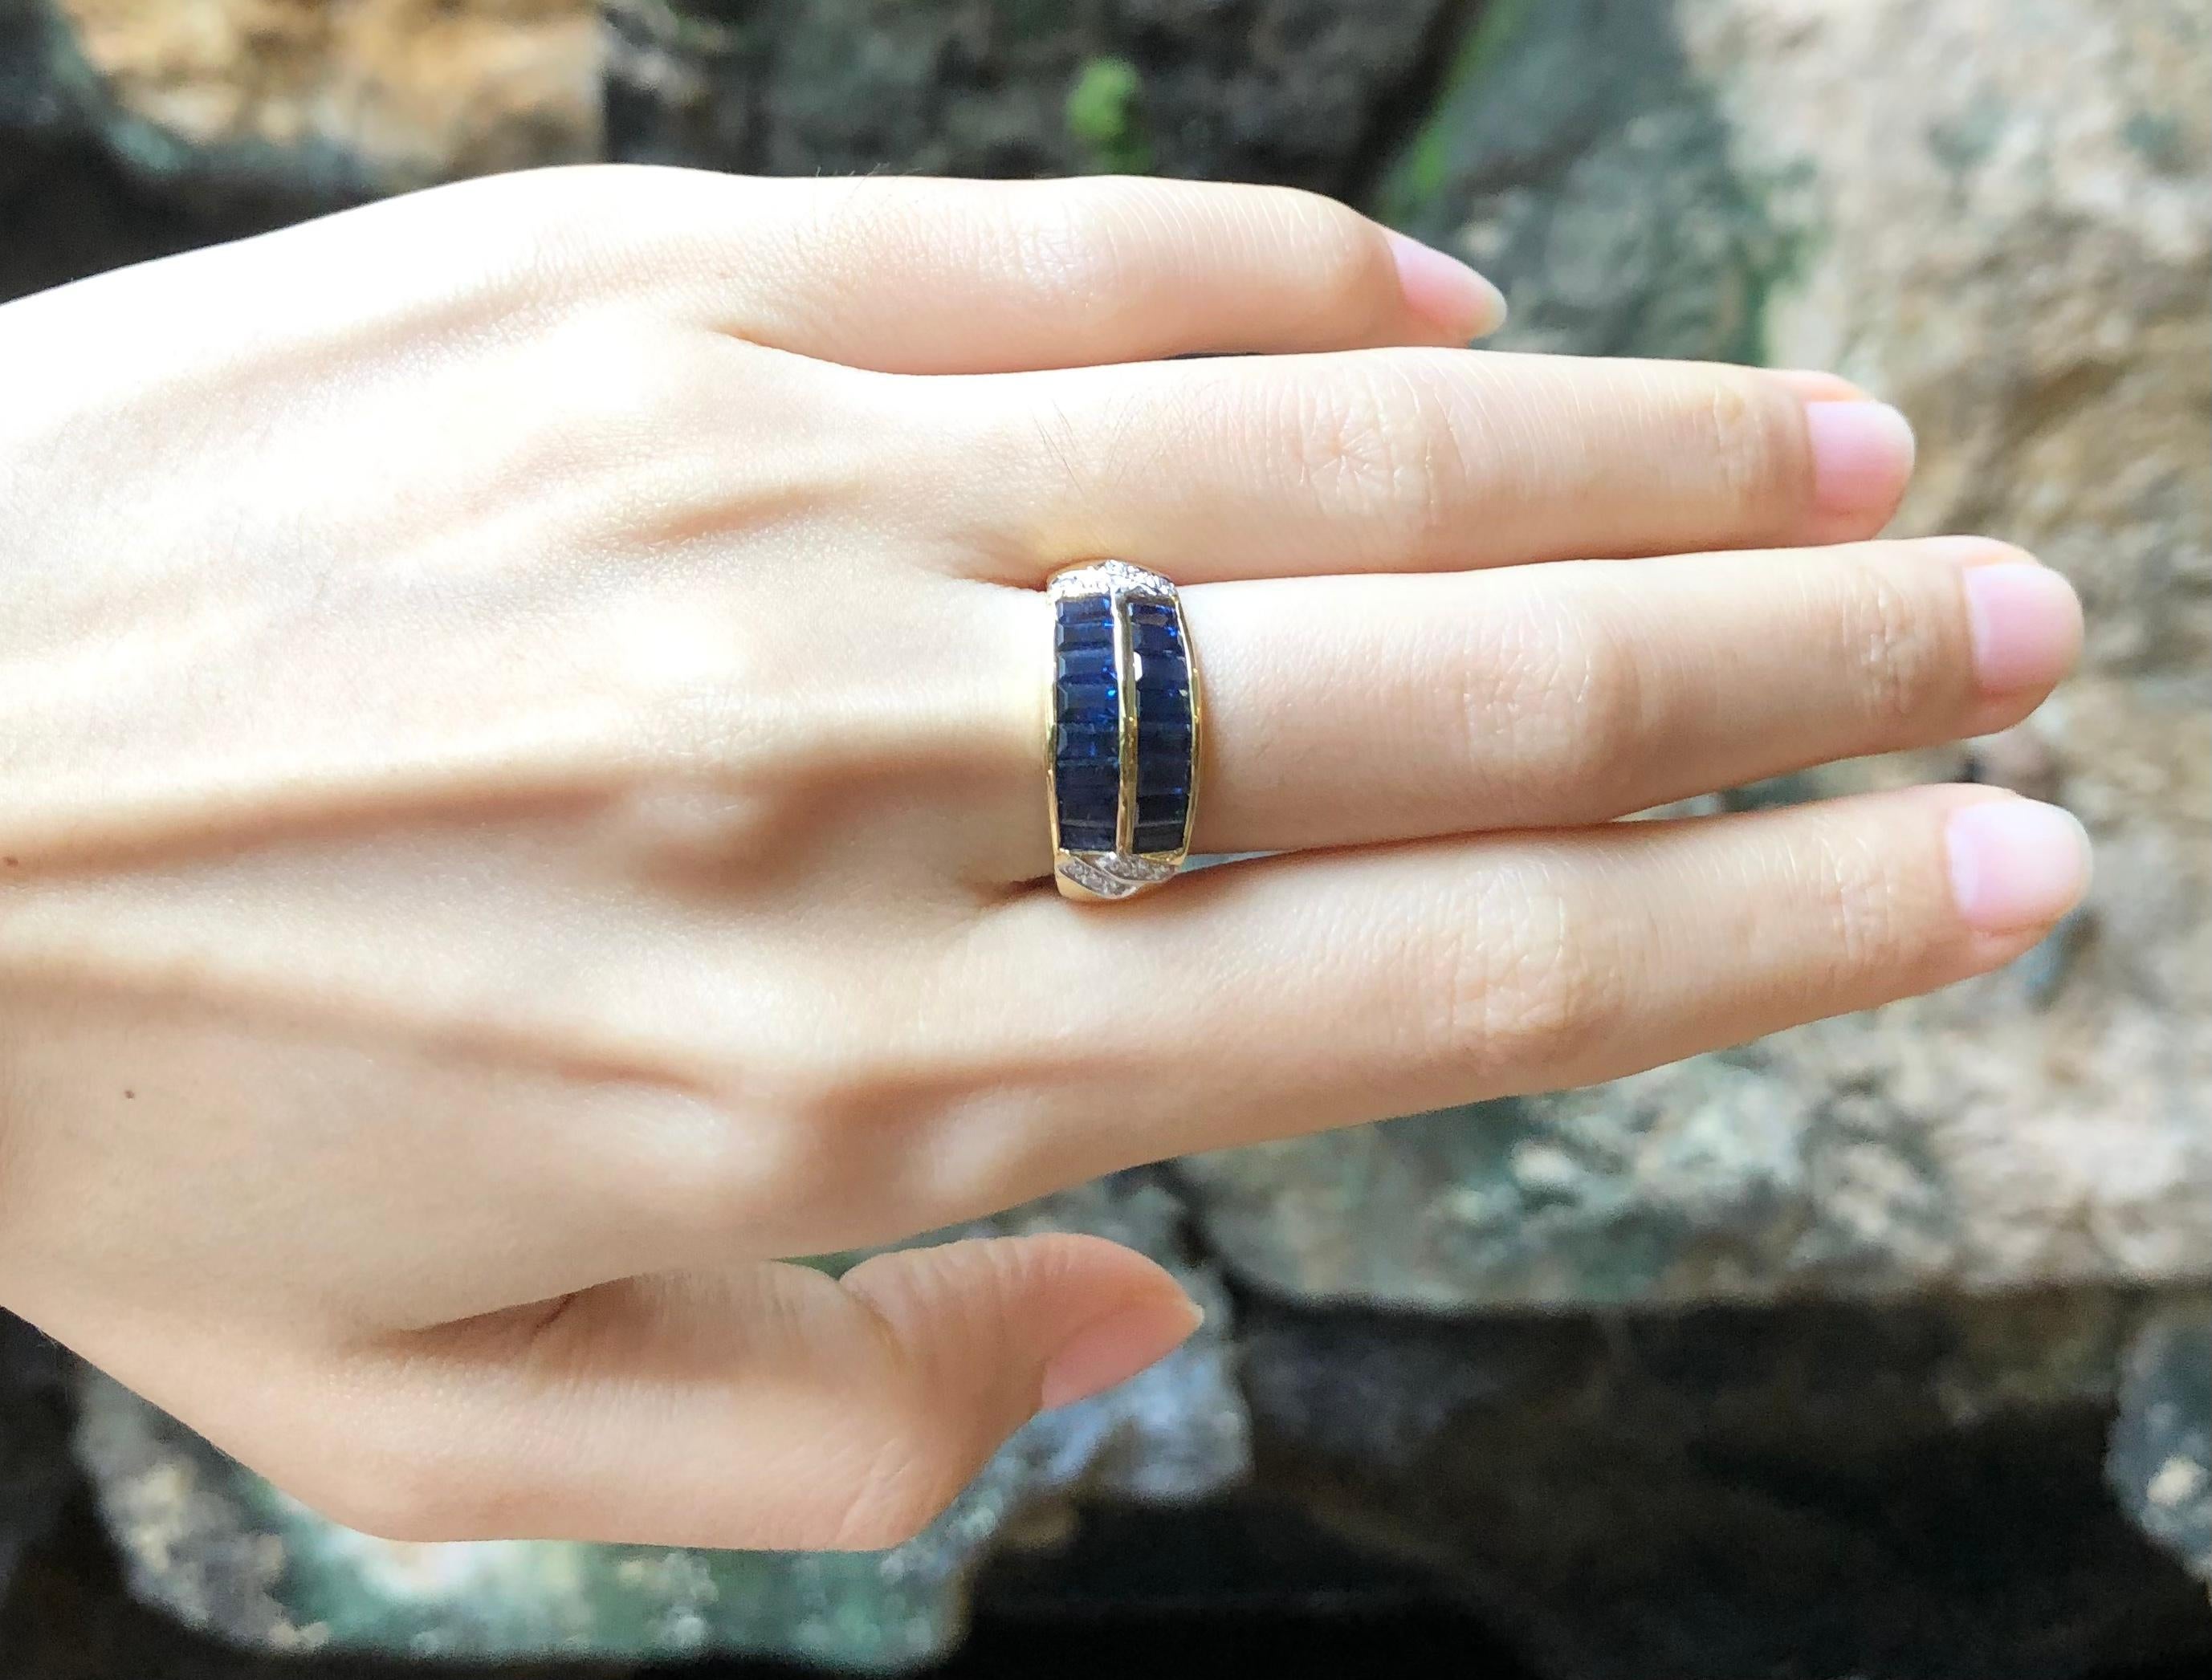 Blue Sapphire 2.96 carats with Diamond 0.09 carat Ring set in 18 Karat Gold Settings

Width:  2.0 cm 
Length: 0.9 cm
Ring Size: 55
Total Weight: 5.4 grams

